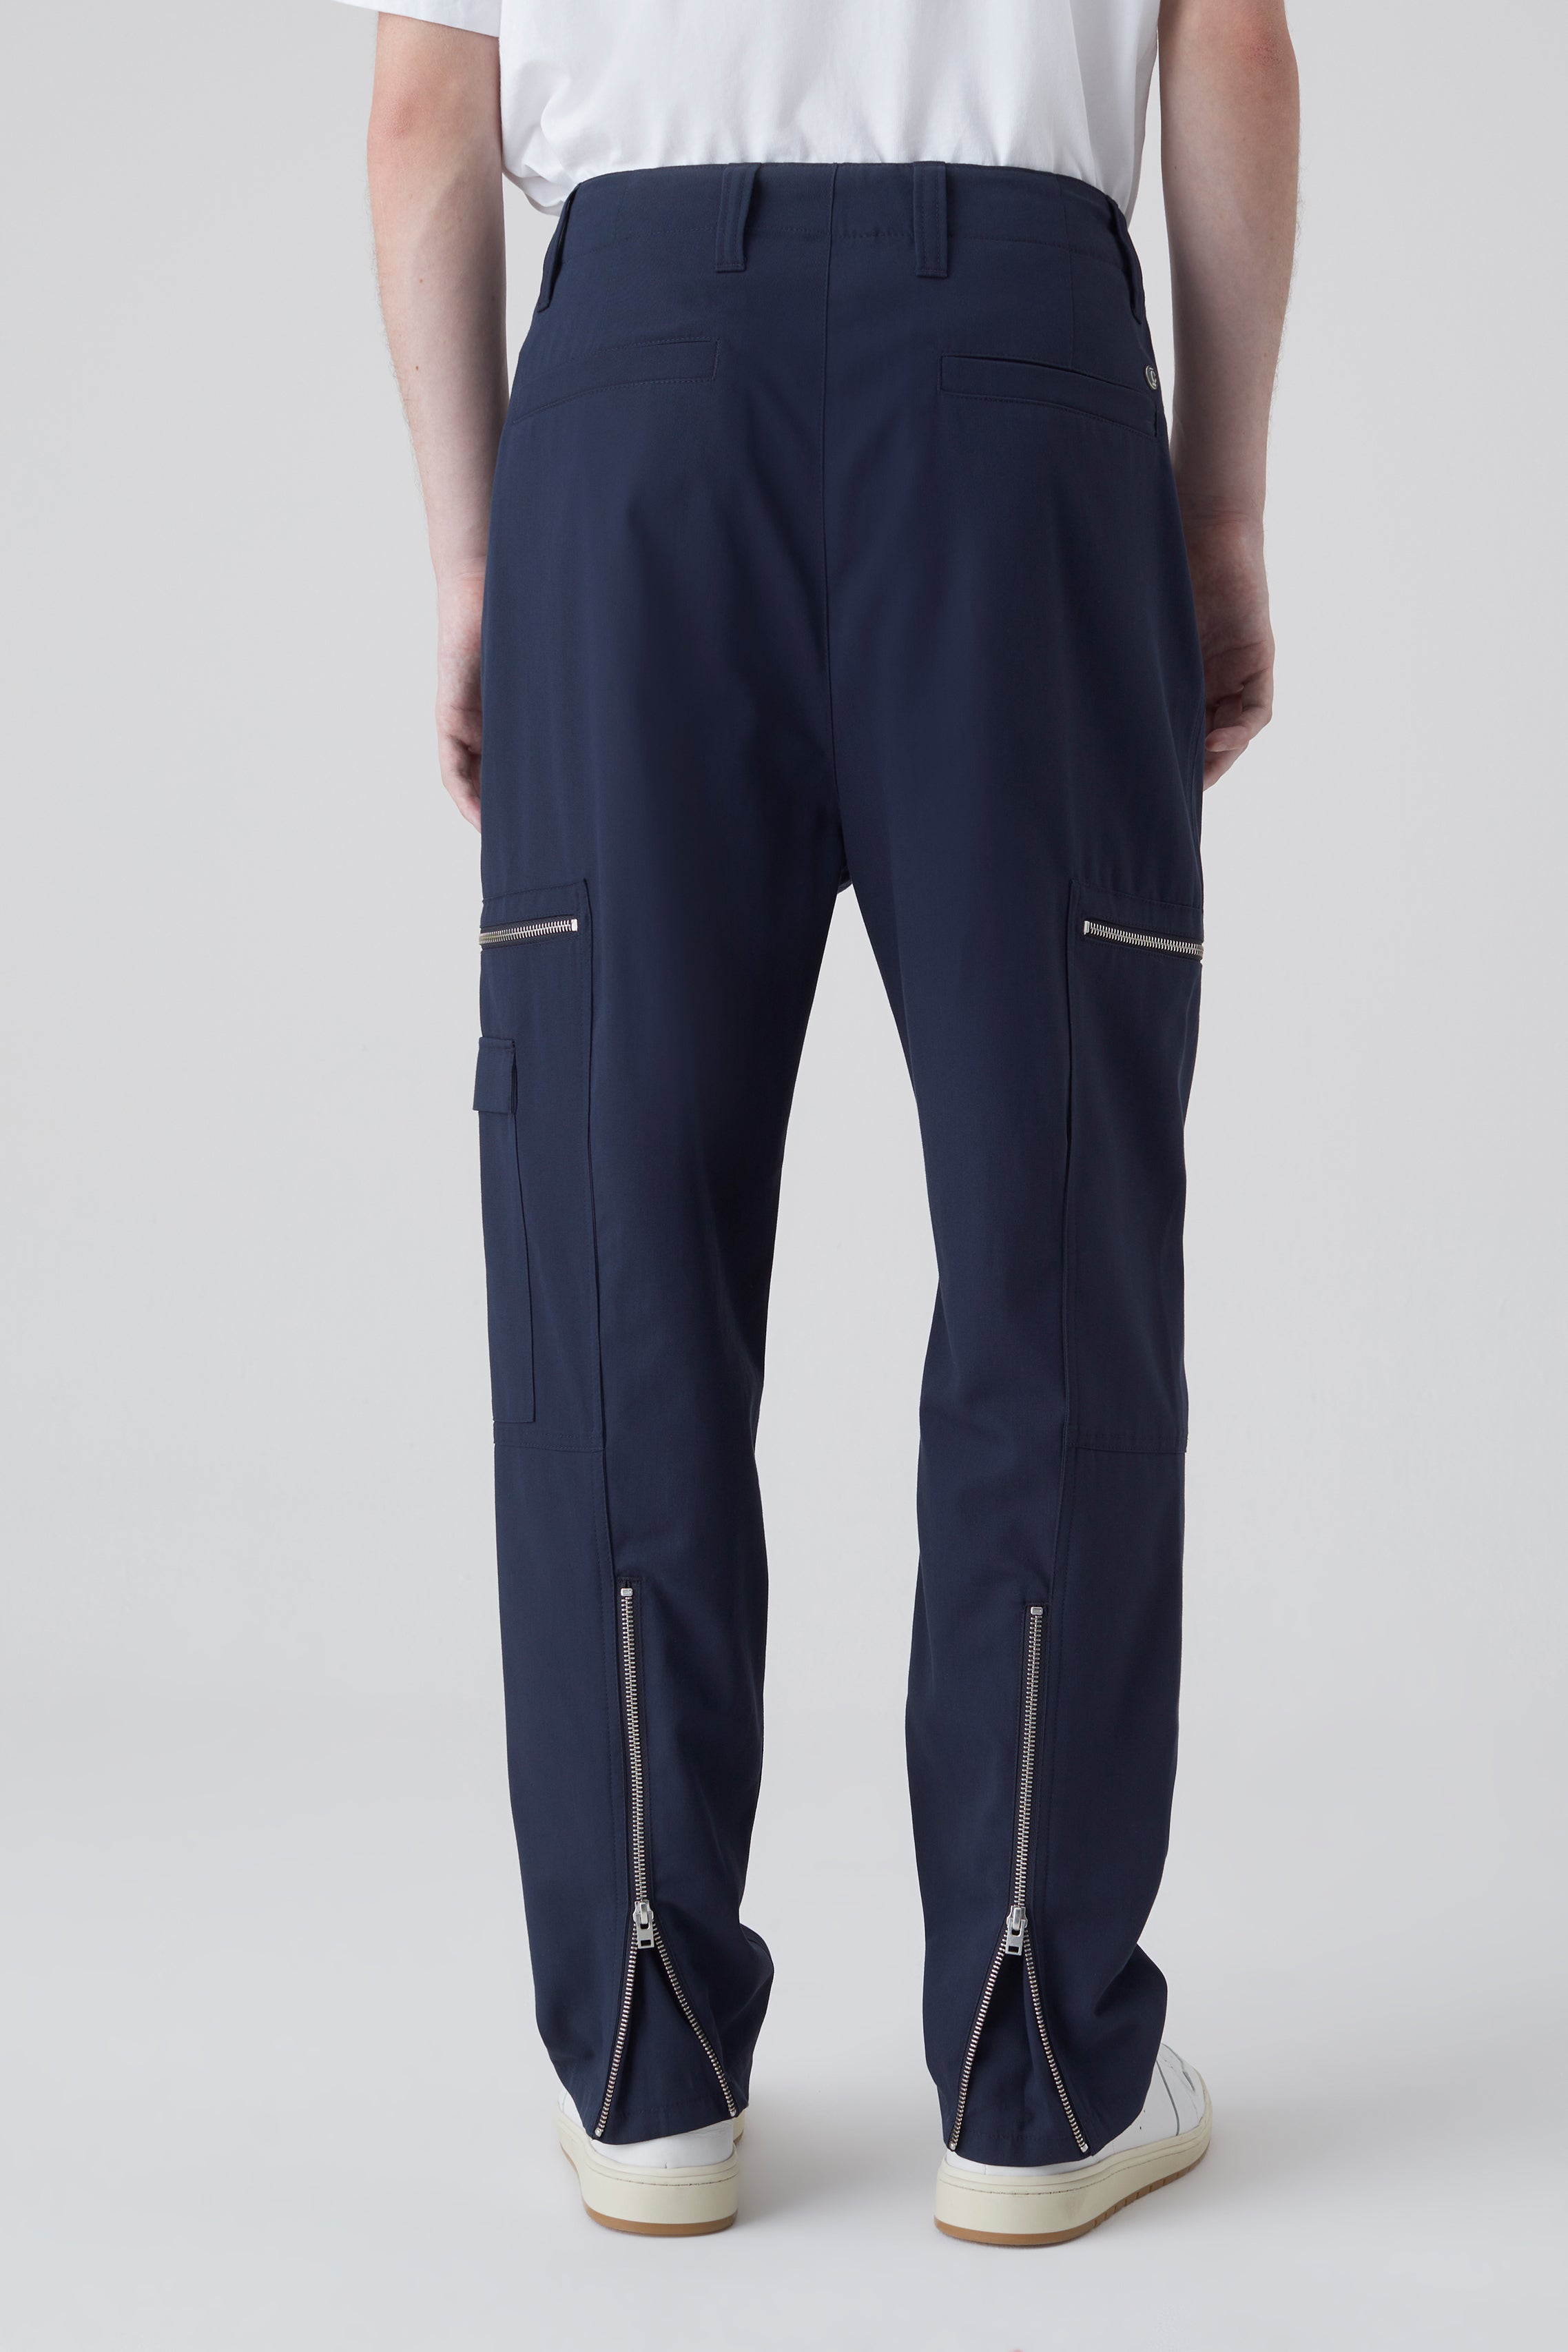 CLOSED-OUTLET-SALE-STYLE-NAME-PILOT-TAPERED-PANTS-Hosen-ARCHIVE-COLLECTION-4.jpg